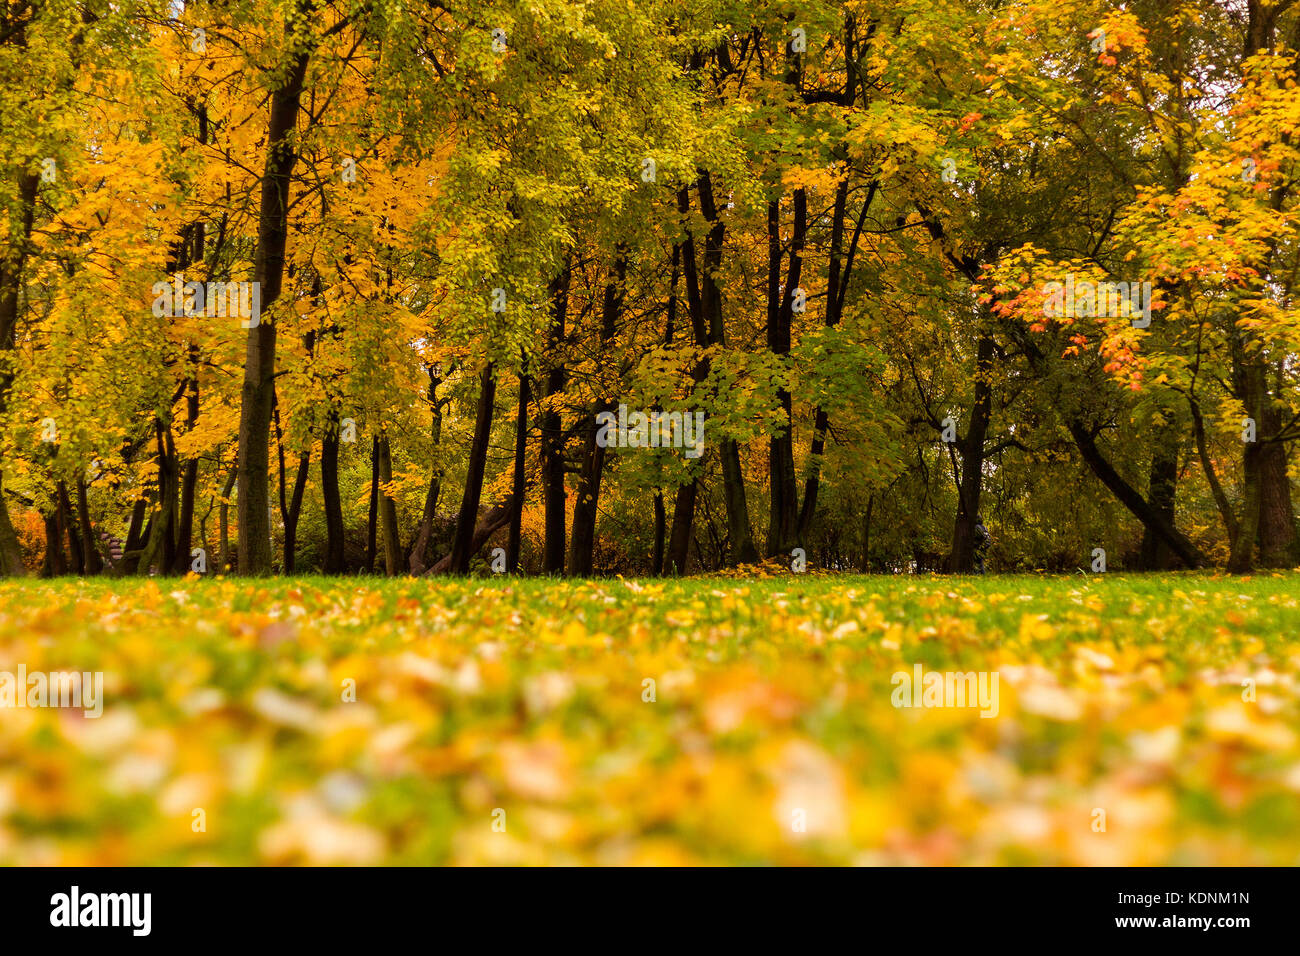 Blurred yellow maple foliage covering grass at a glade in a park by an autumn day with maple trees as a background. Stock Photo